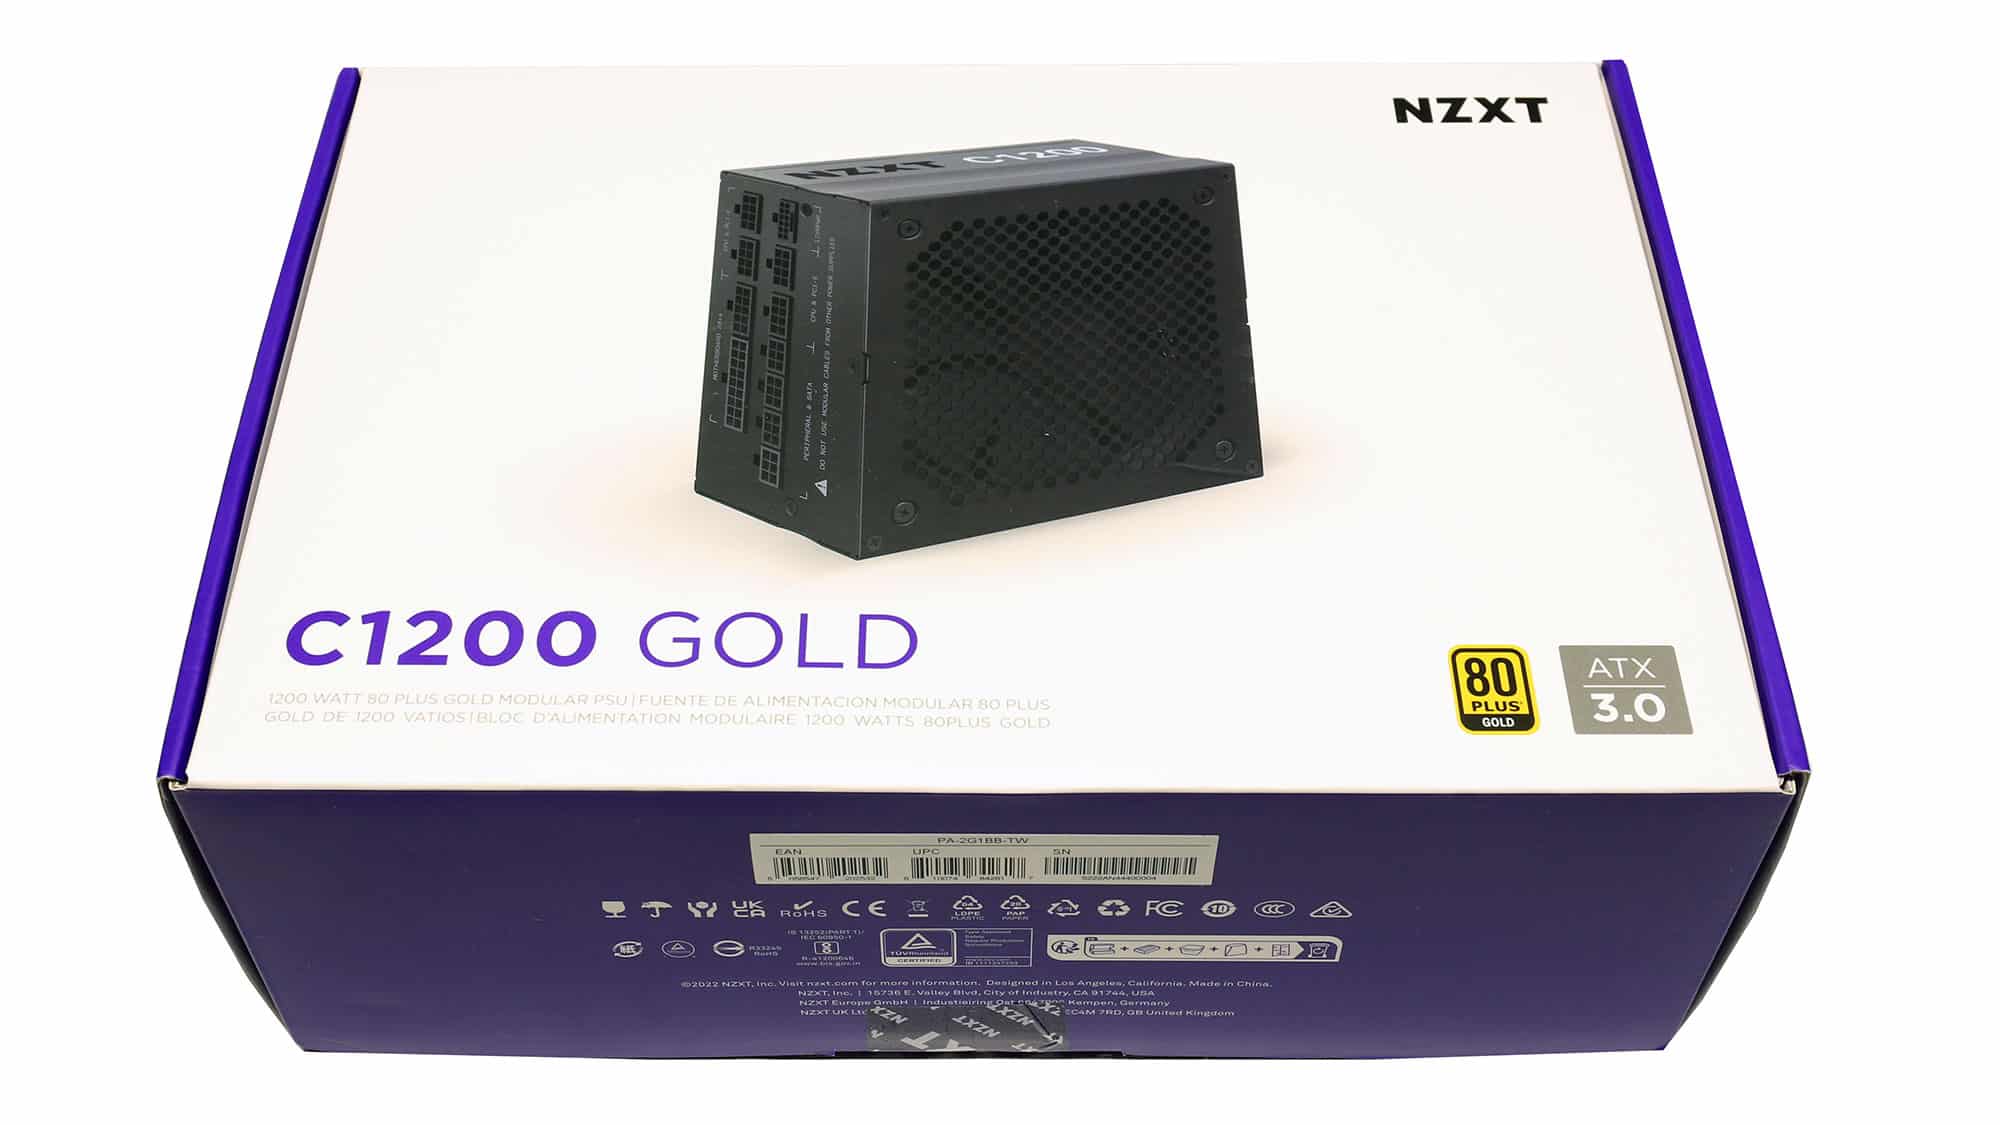 NZXT C1200 Gold PSU Review: Top Performance - Page 2 of 11